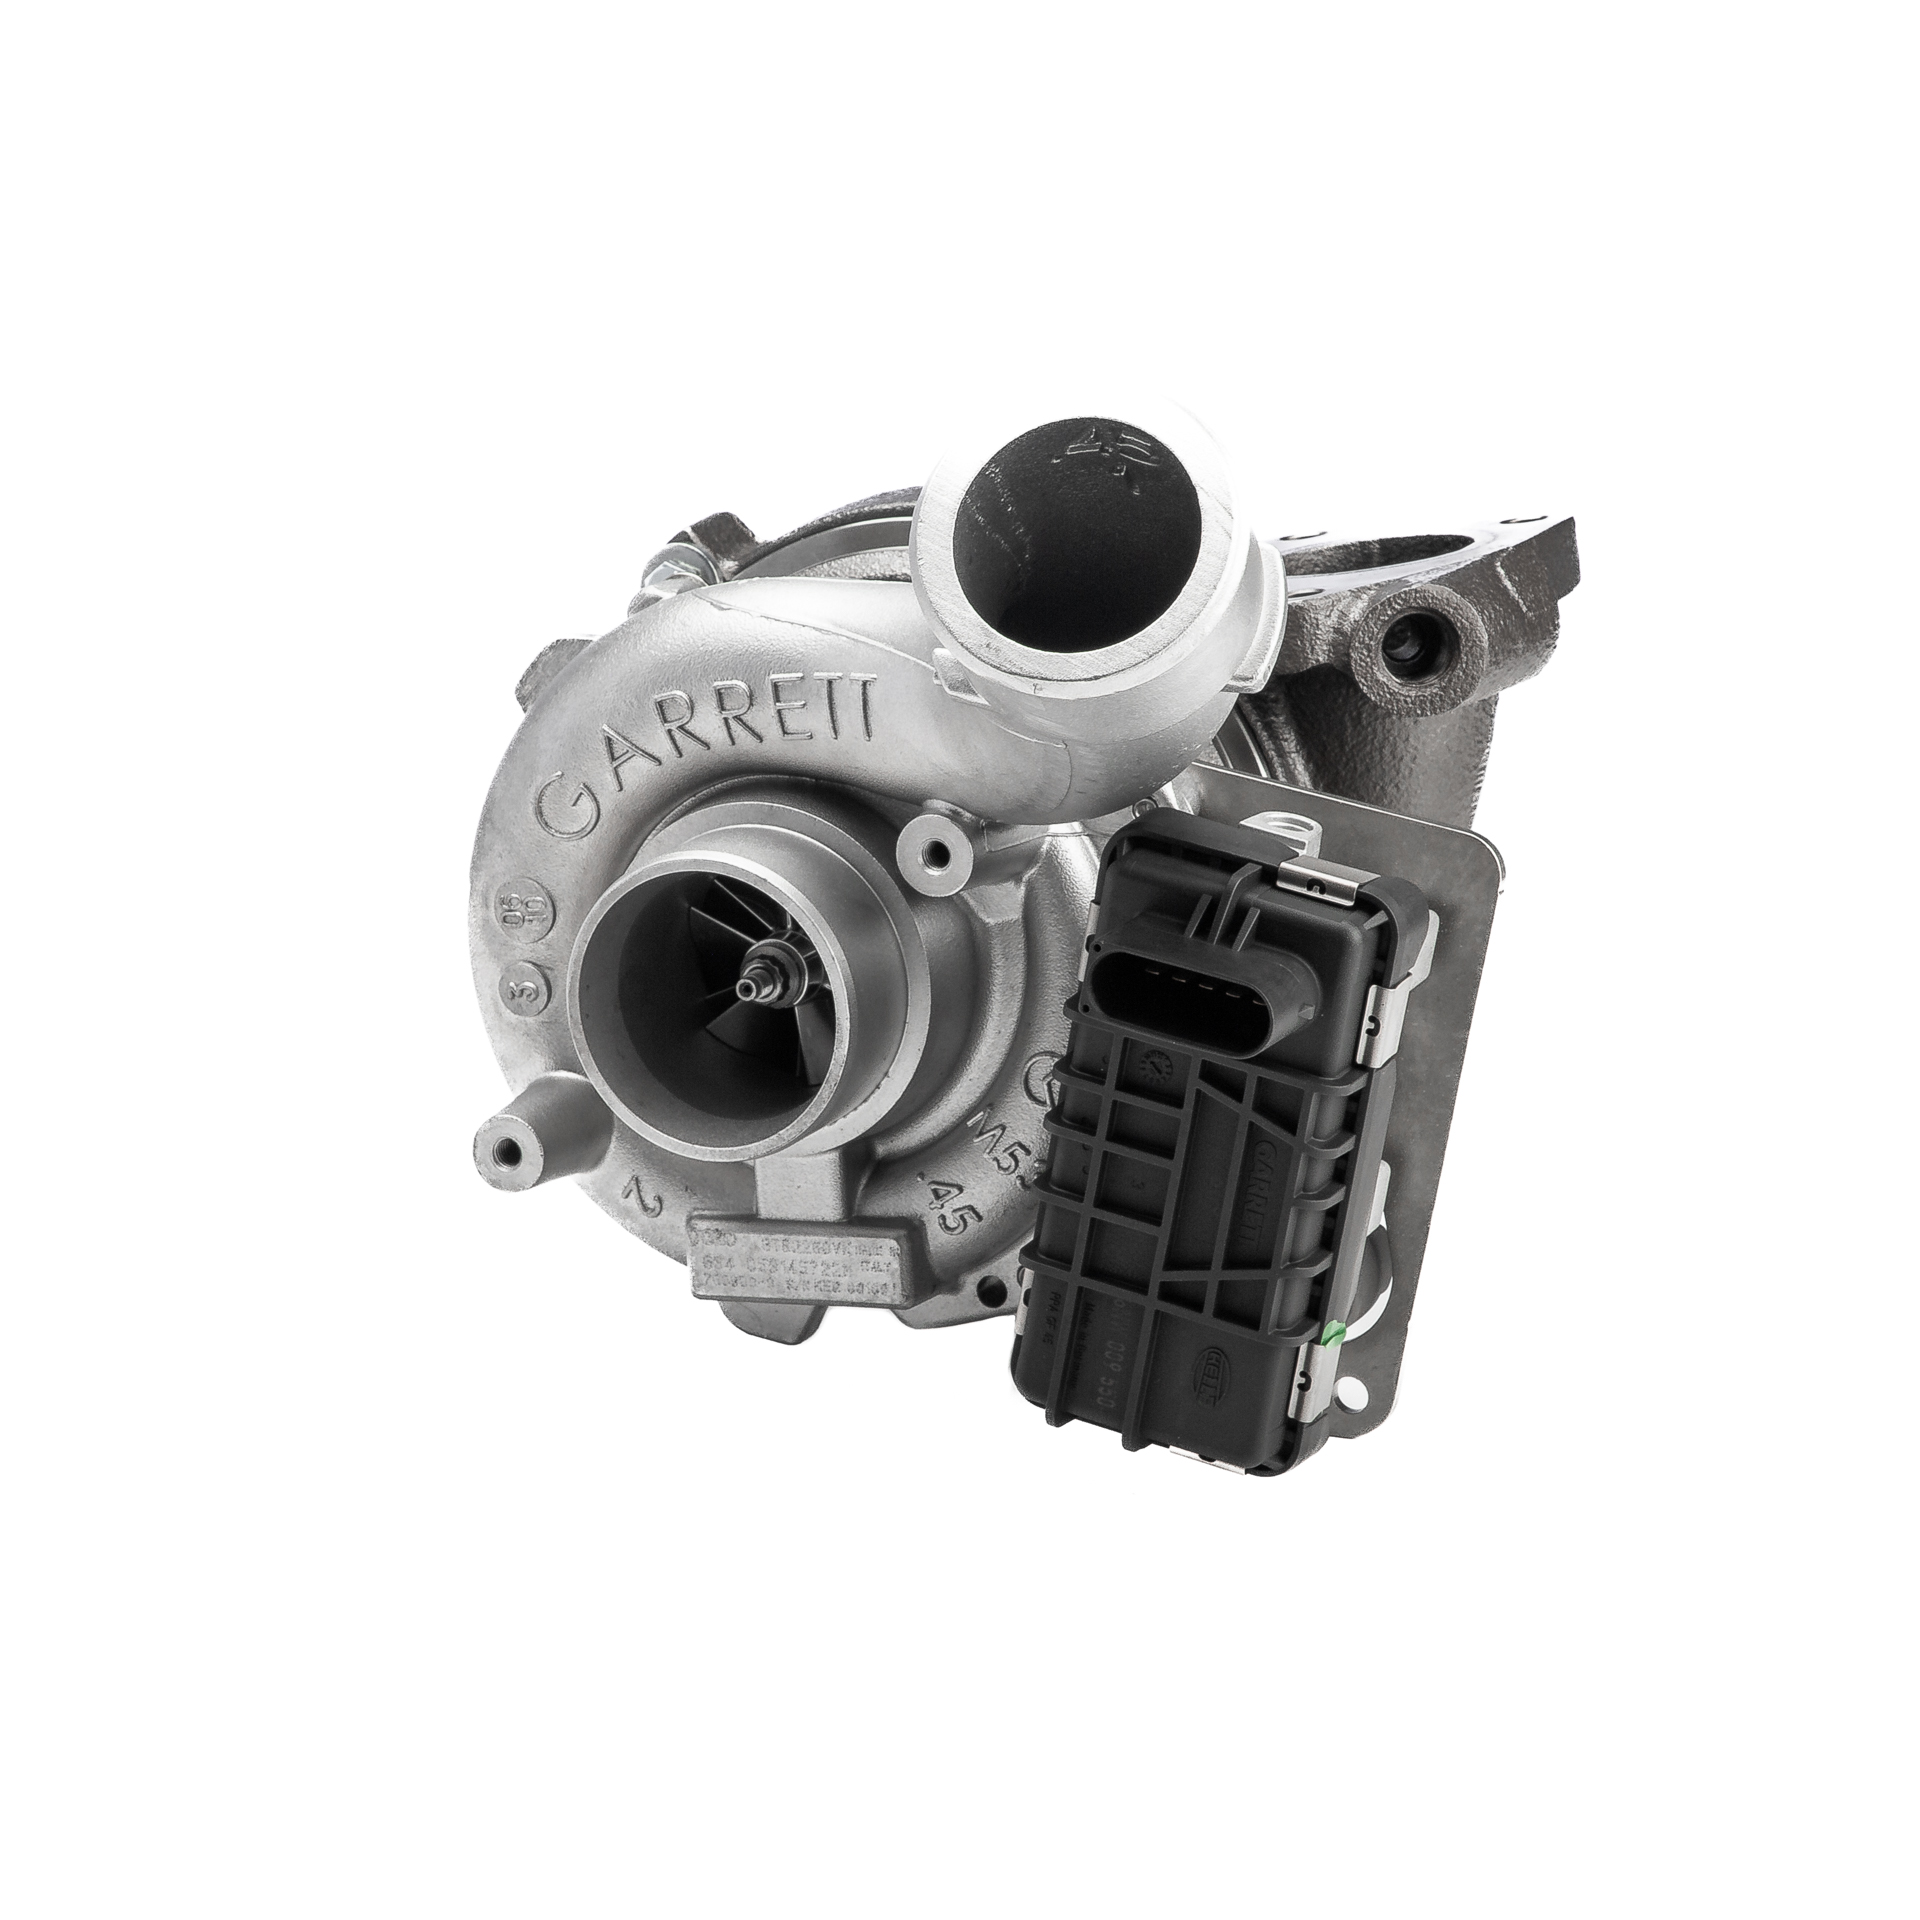 Audi A6 Turbocharger 16875907 BR Turbo 776470-5001RS online buy